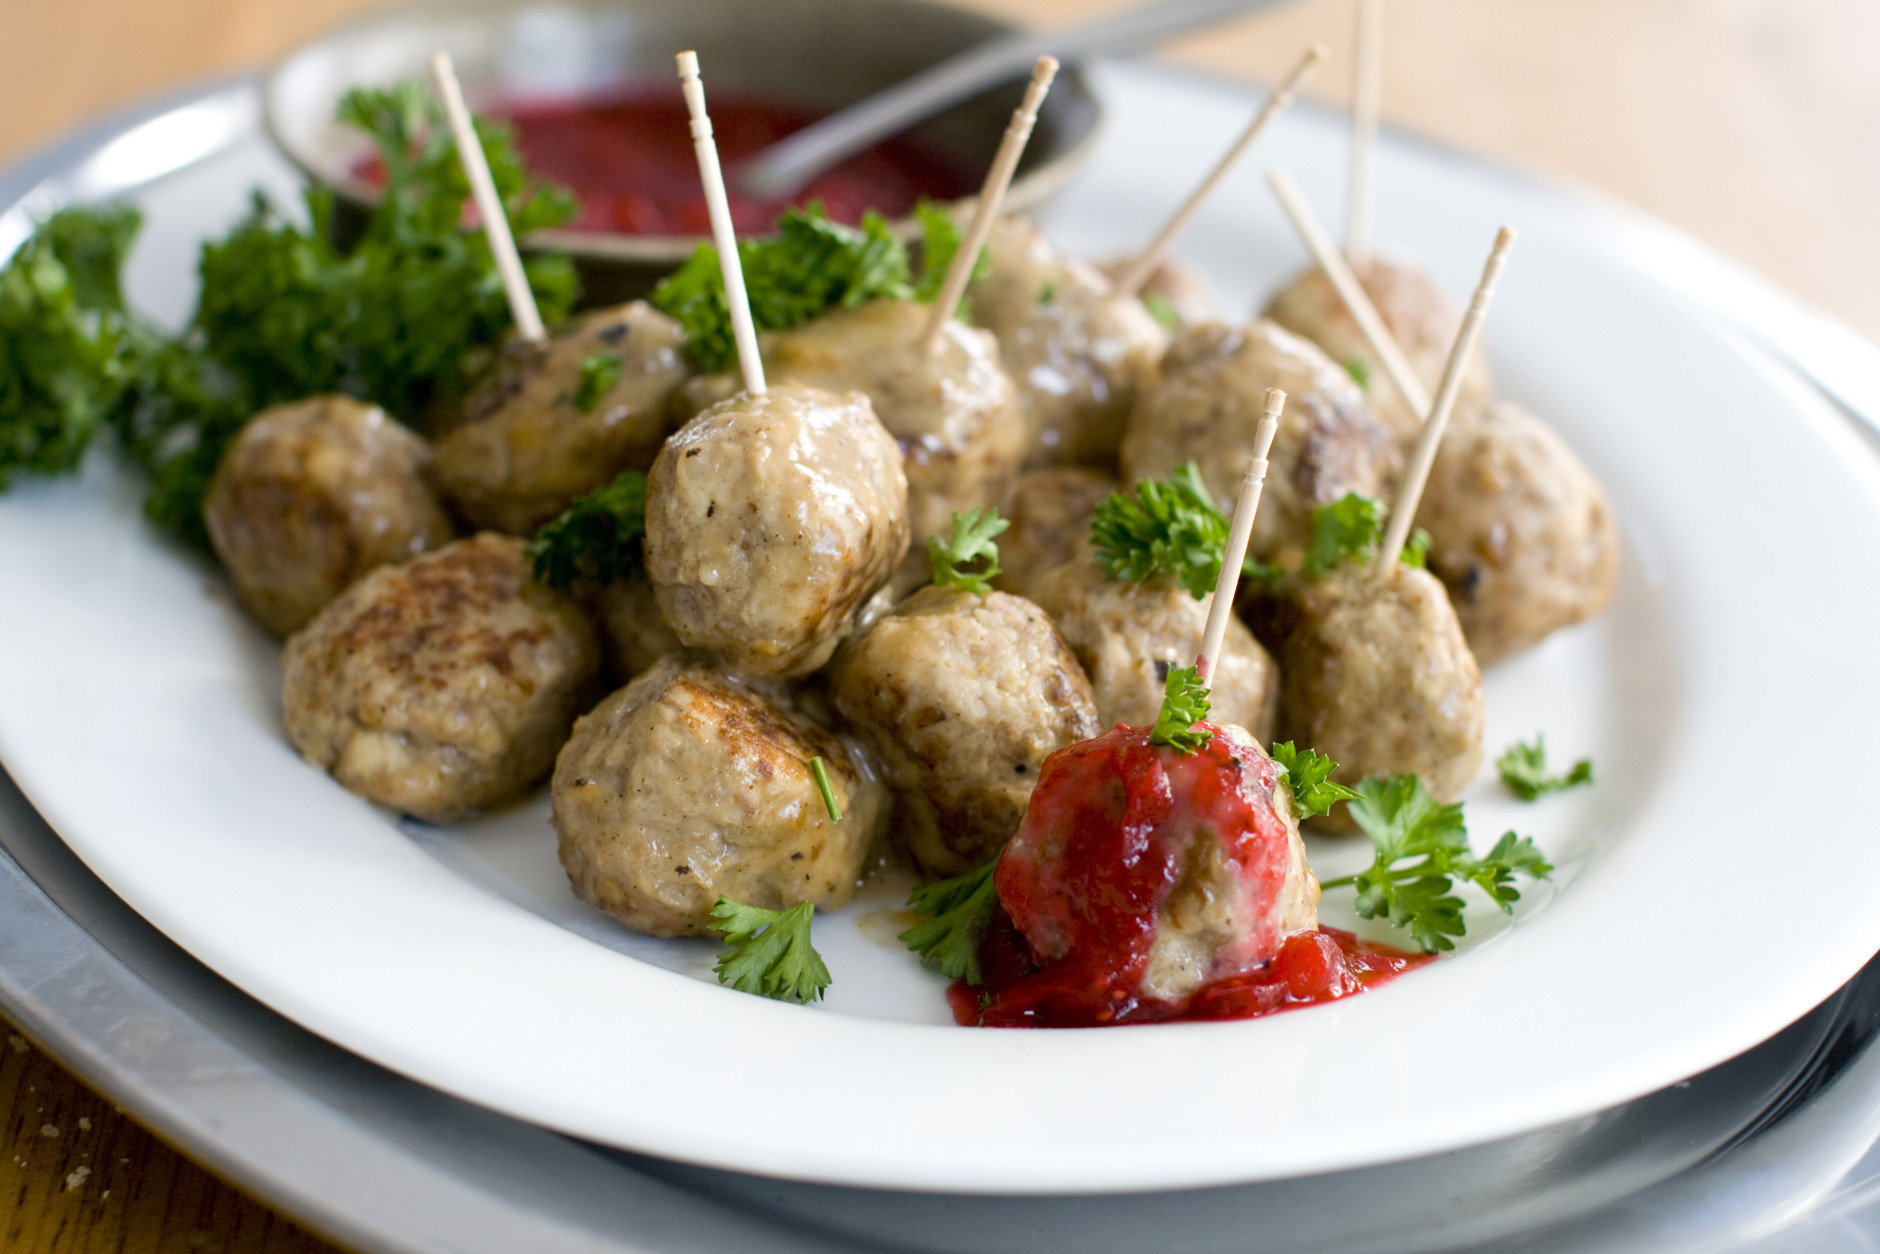 In this image taken Jan. 30, 2012 in Concord, N.H., a Swedish meatball recipe by Rocco DiSpirito is shown. Swedish meatballs are a retro potluck throwback. There are countless recipes for Swedish meatballs, but most aren't all that diet-friendly. (AP Photo/Matthew Mead)